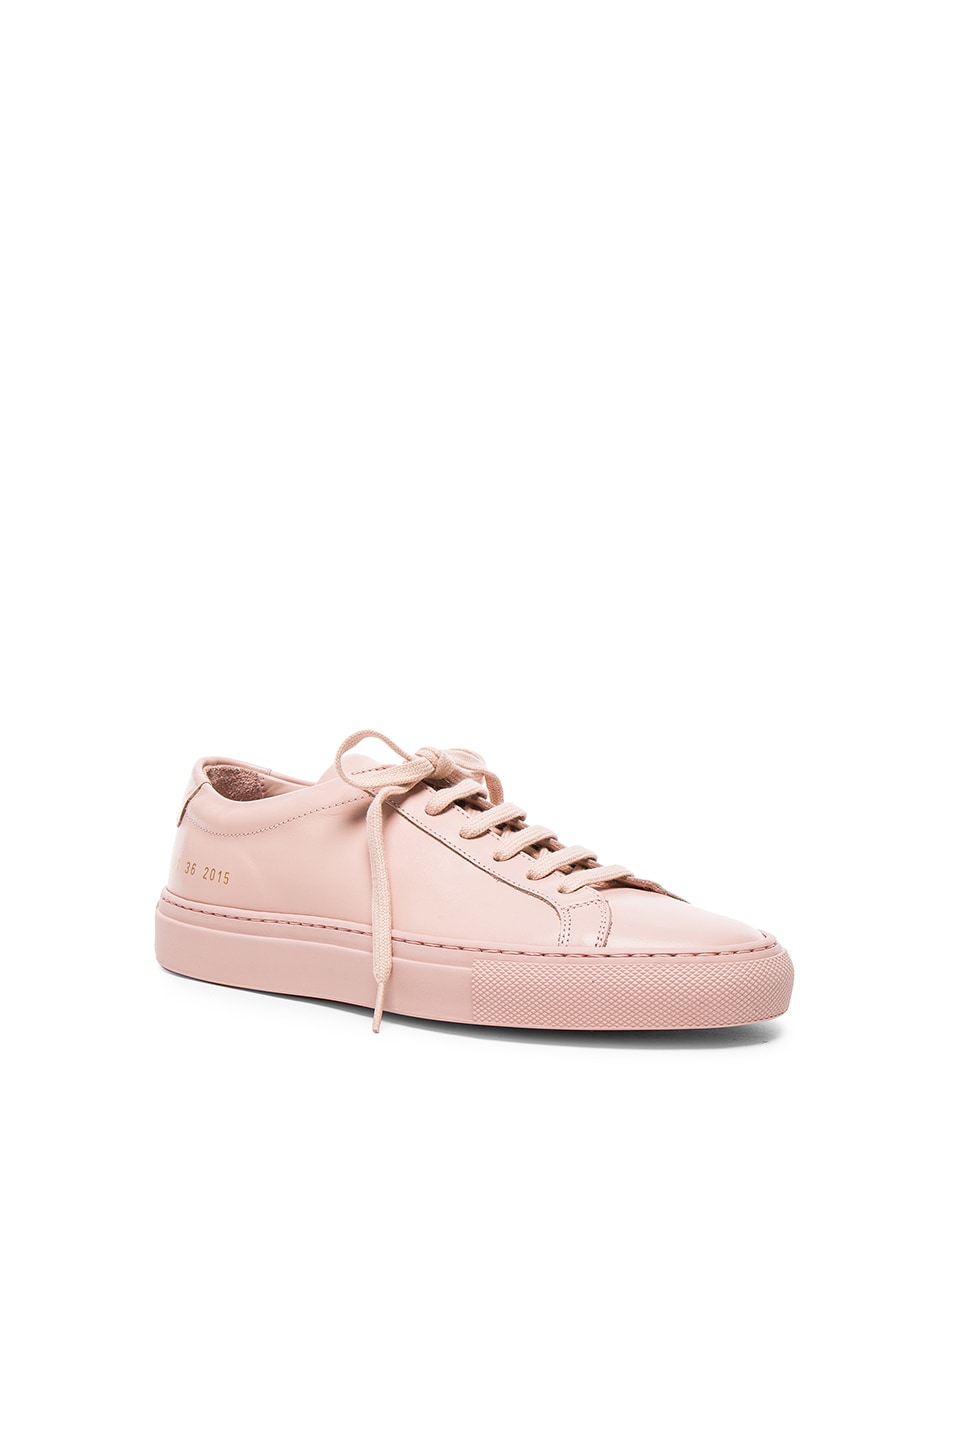 COMMON PROJECTS Original Achilles Low-Top Leather Trainers in Light ...